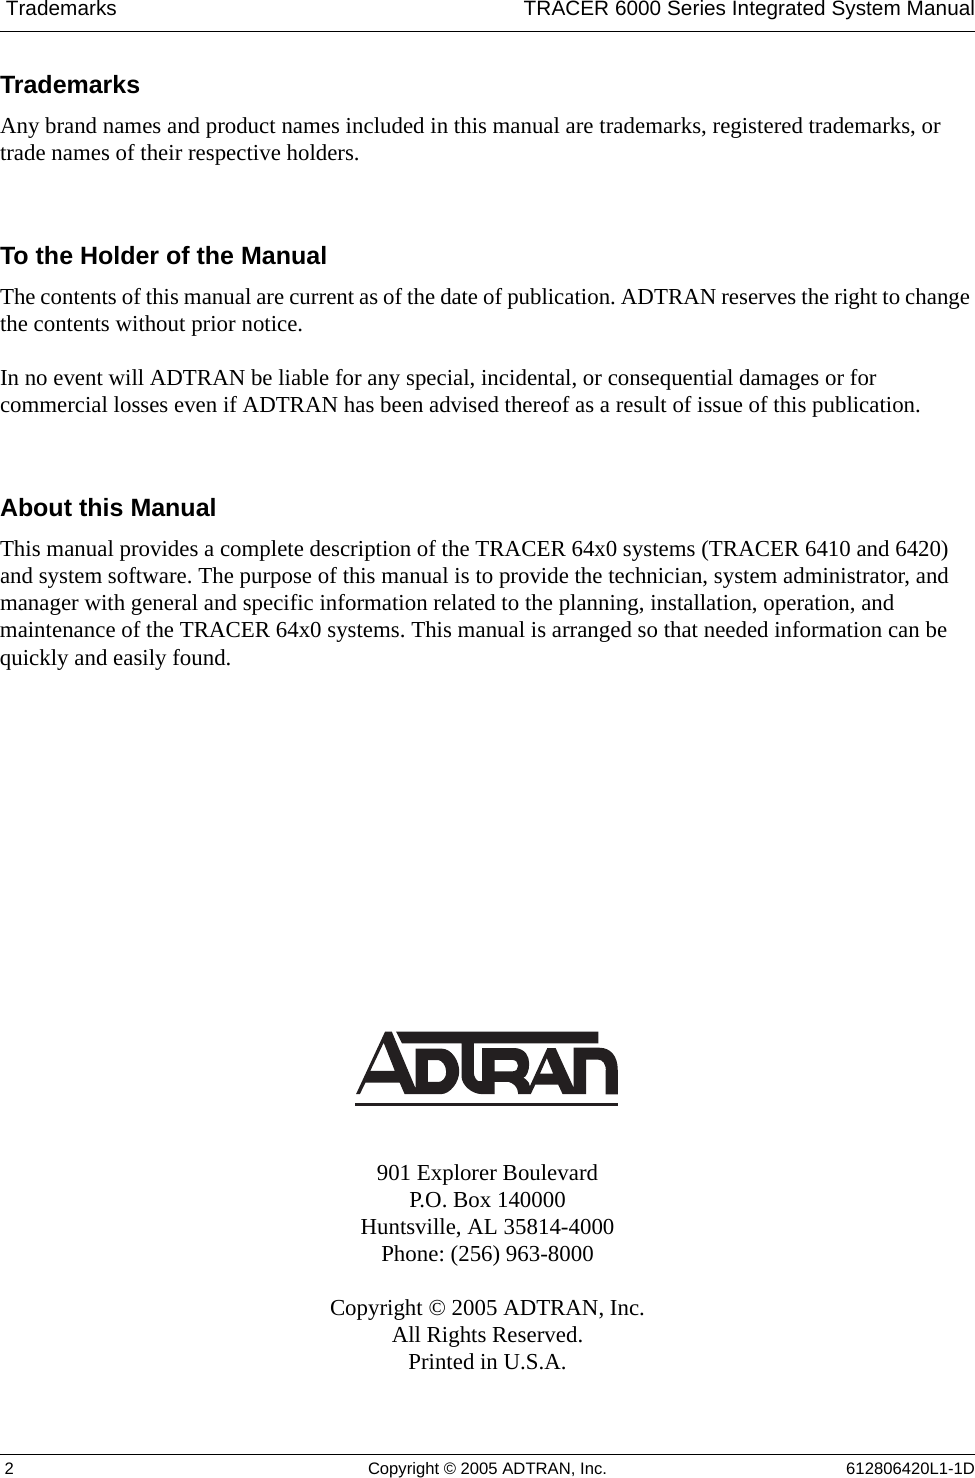  Trademarks TRACER 6000 Series Integrated System Manual 2 Copyright © 2005 ADTRAN, Inc. 612806420L1-1DTrademarksAny brand names and product names included in this manual are trademarks, registered trademarks, or trade names of their respective holders.To the Holder of the ManualThe contents of this manual are current as of the date of publication. ADTRAN reserves the right to change the contents without prior notice.In no event will ADTRAN be liable for any special, incidental, or consequential damages or for commercial losses even if ADTRAN has been advised thereof as a result of issue of this publication.About this ManualThis manual provides a complete description of the TRACER 64x0 systems (TRACER 6410 and 6420) and system software. The purpose of this manual is to provide the technician, system administrator, and manager with general and specific information related to the planning, installation, operation, and maintenance of the TRACER 64x0 systems. This manual is arranged so that needed information can be quickly and easily found. 901 Explorer BoulevardP.O. Box 140000Huntsville, AL 35814-4000Phone: (256) 963-8000Copyright © 2005 ADTRAN, Inc.All Rights Reserved.Printed in U.S.A.